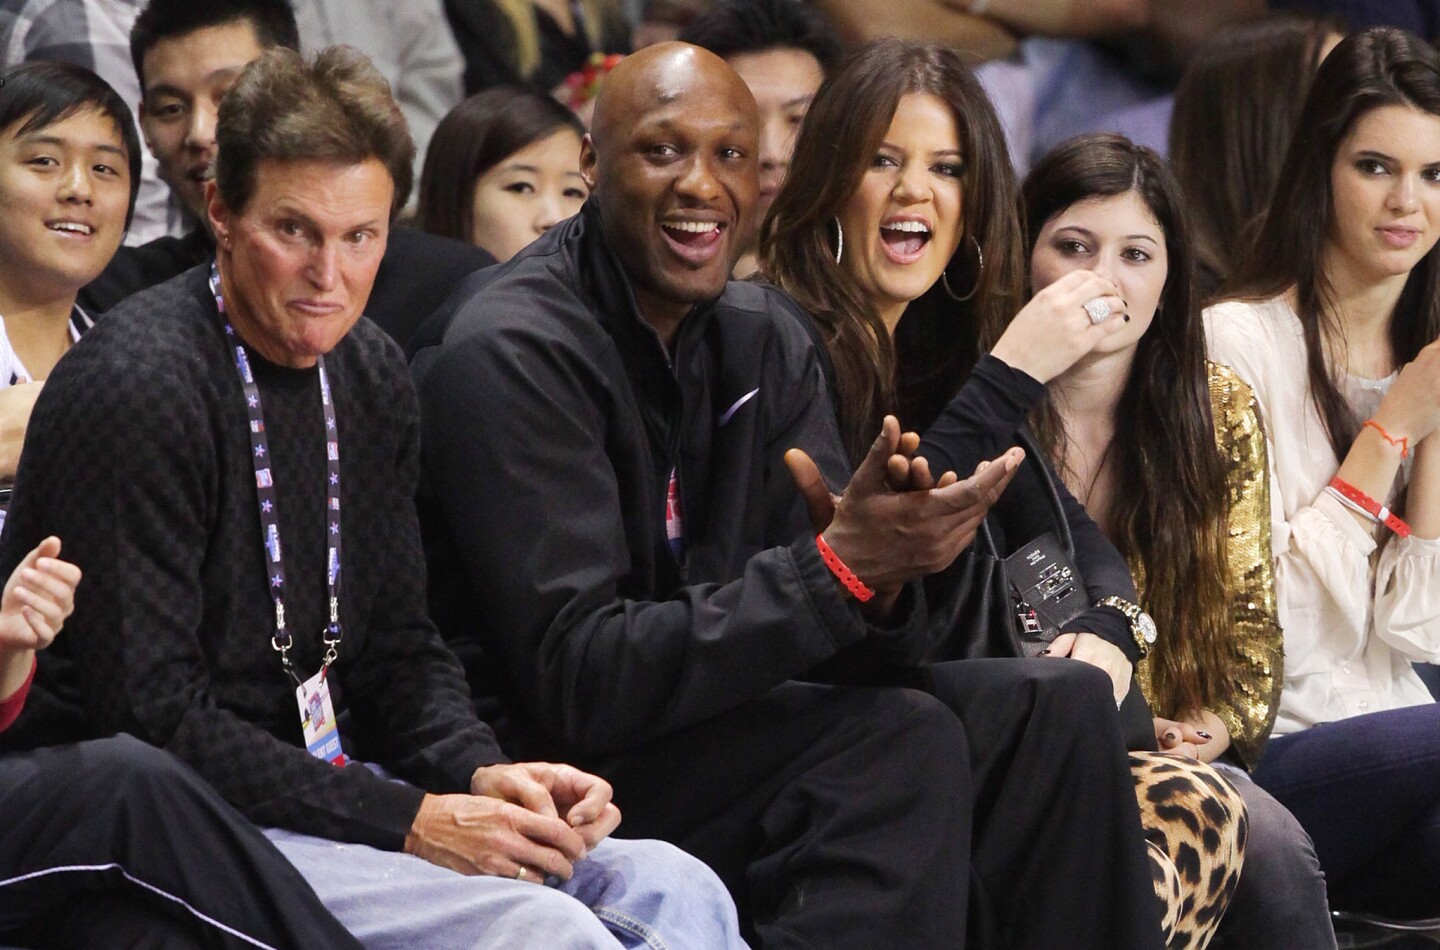 From left: Bruce Jenner, Lamar Odom and Khloe Kardashian play at the 2011 BBVA NBA All-Star Celebrity Game at the Los Angeles Convention Center.